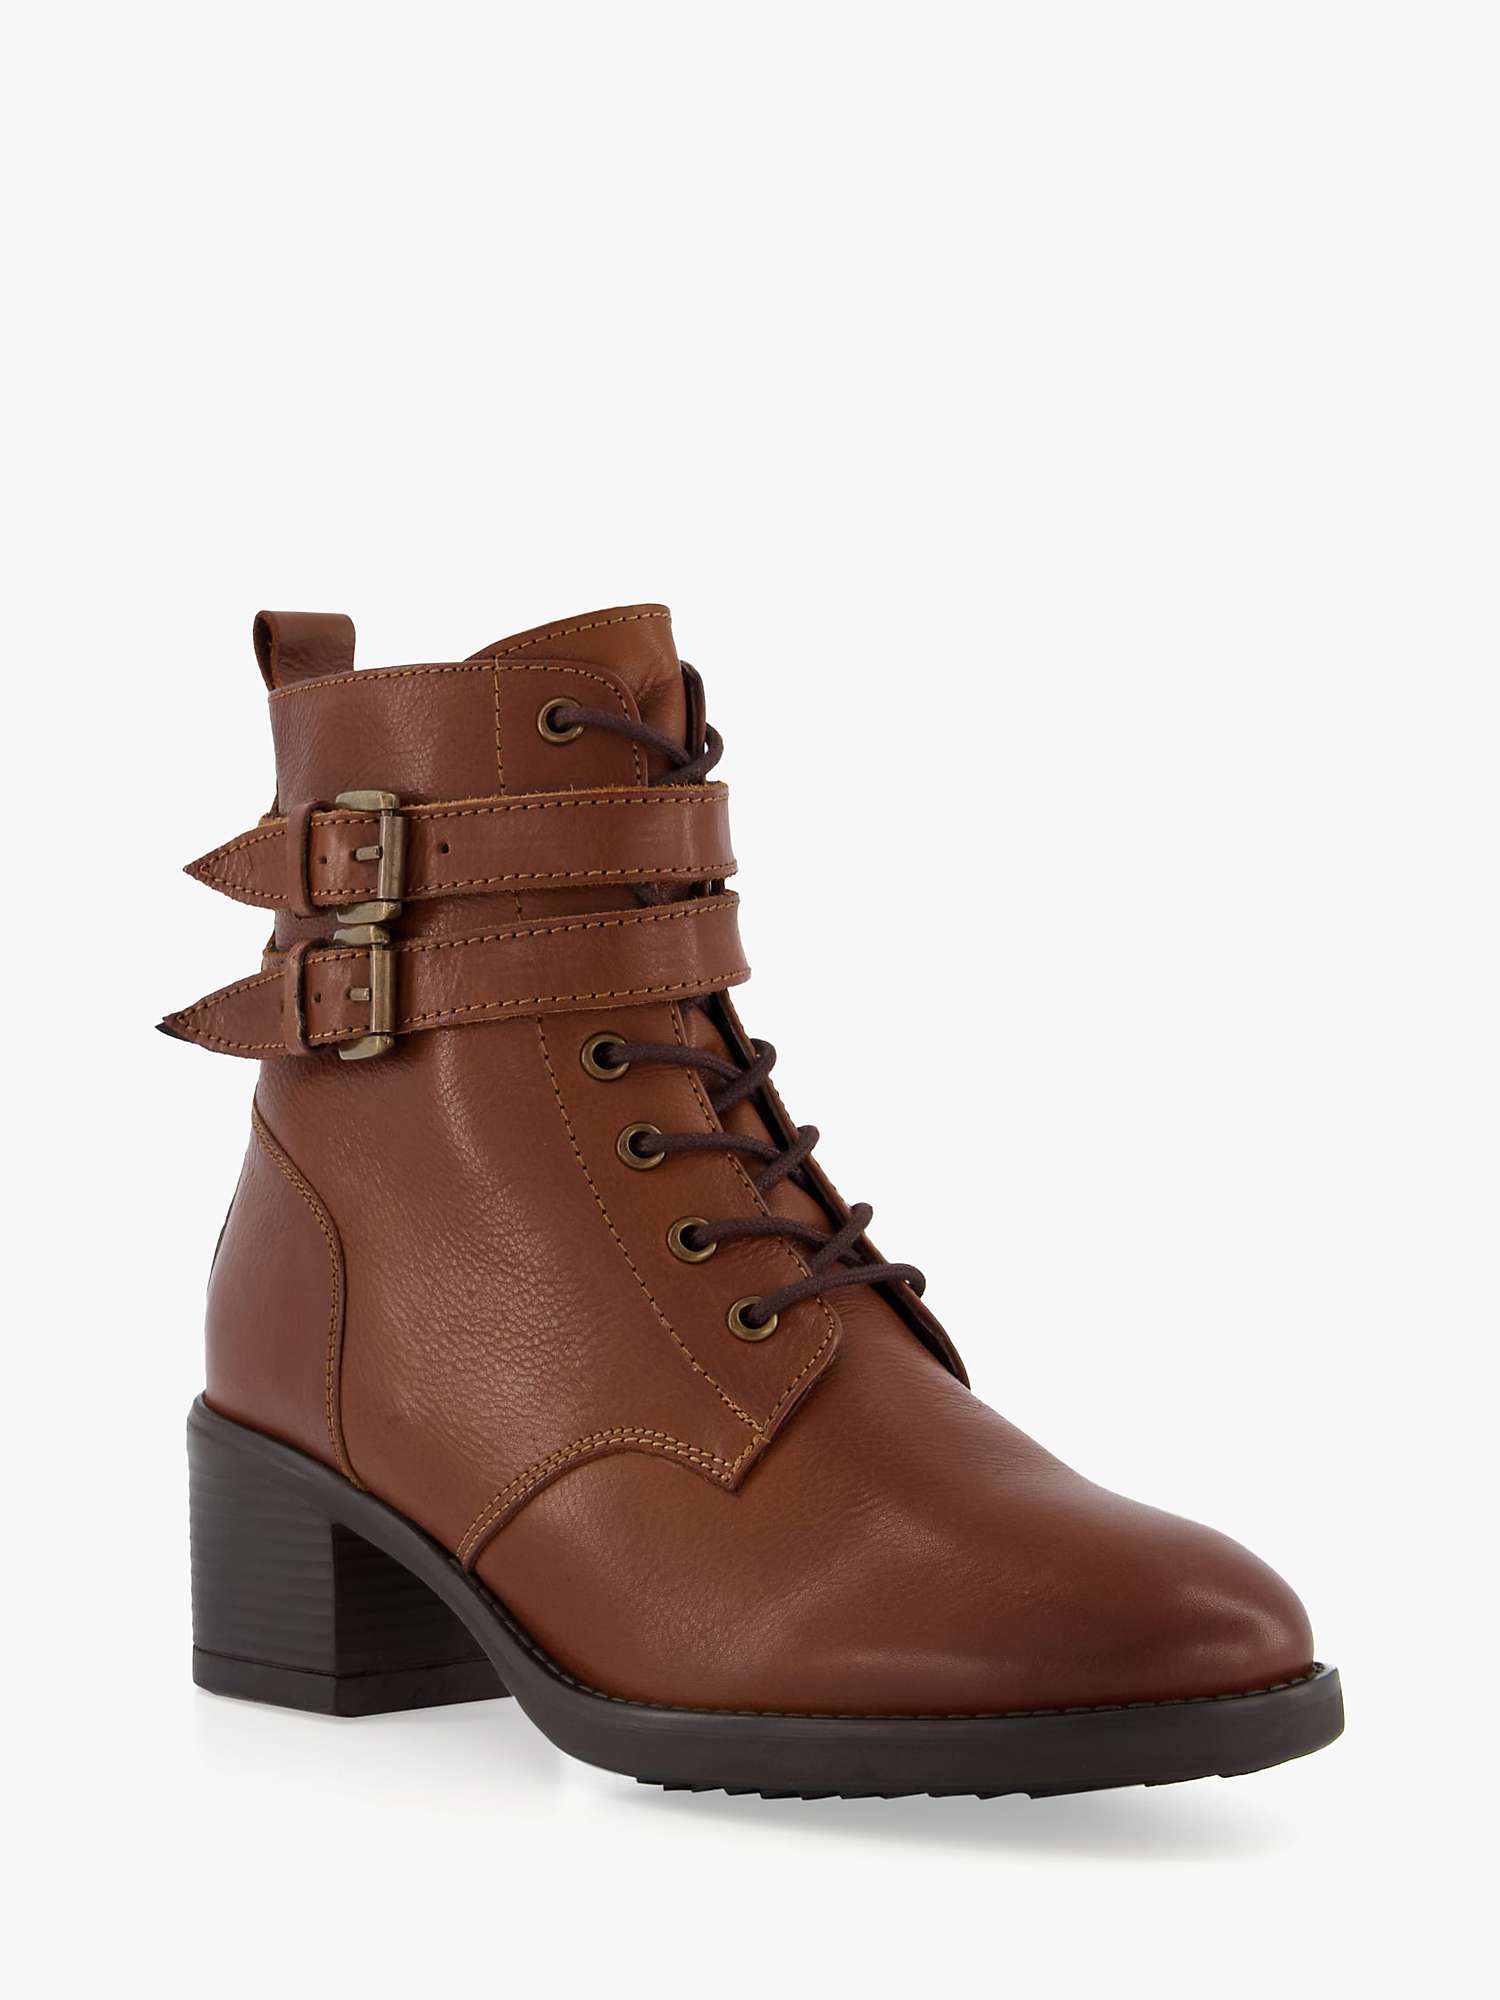 Buy Dune Wide Fit Paxan Leather Ankle Boots Online at johnlewis.com